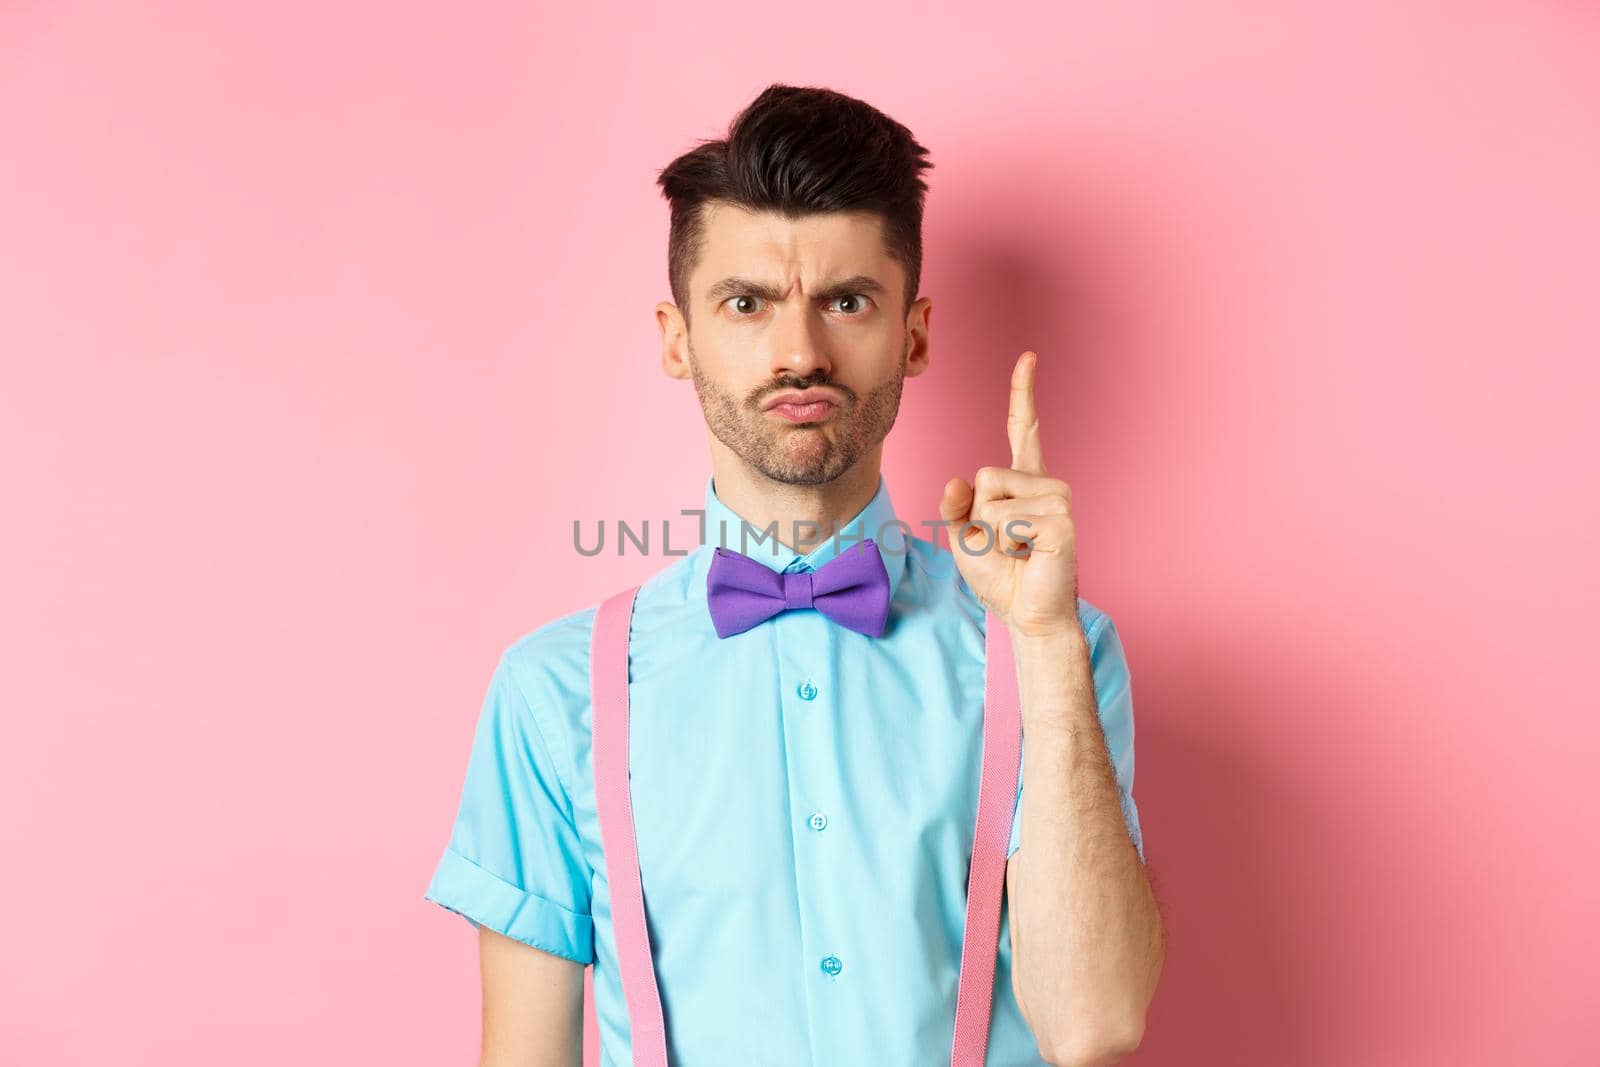 Angry male teacher shaking finger and scolding someone who misbehave, frowning grumpy, and teaching lesson, standing over pink background.